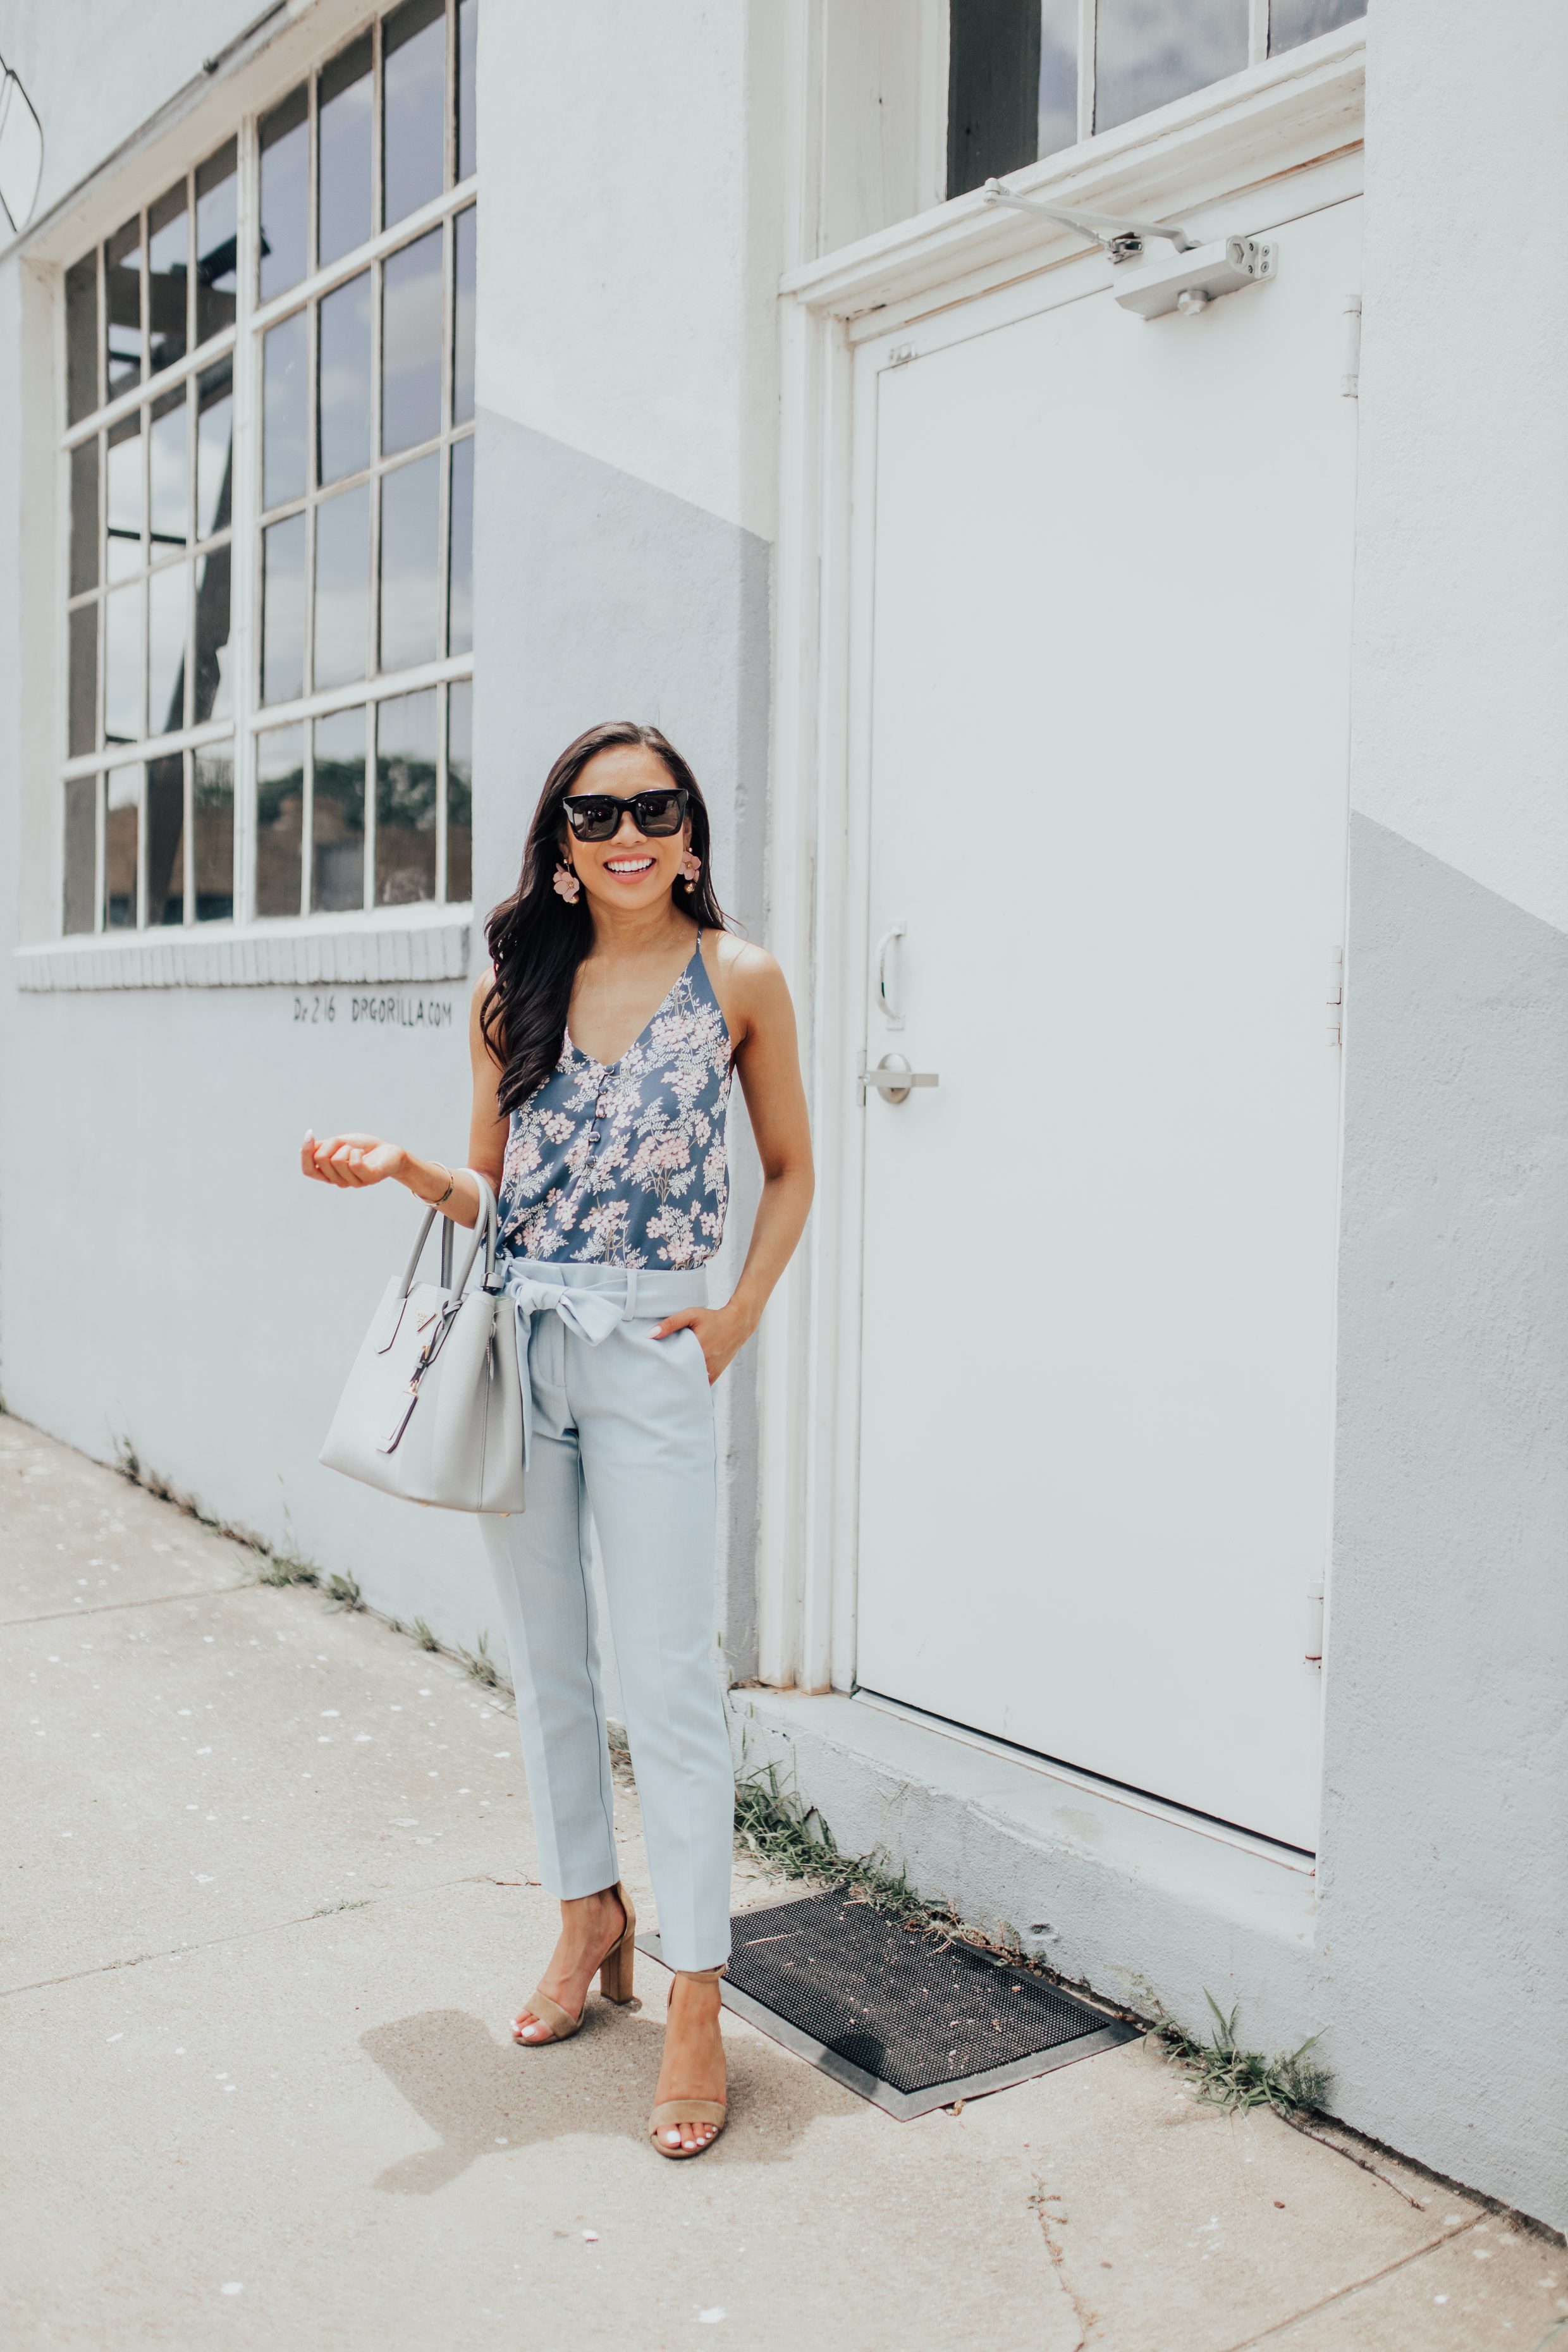 Hoang-Kim wears a floral cami and blue tie waist pants for a business casual workwear look